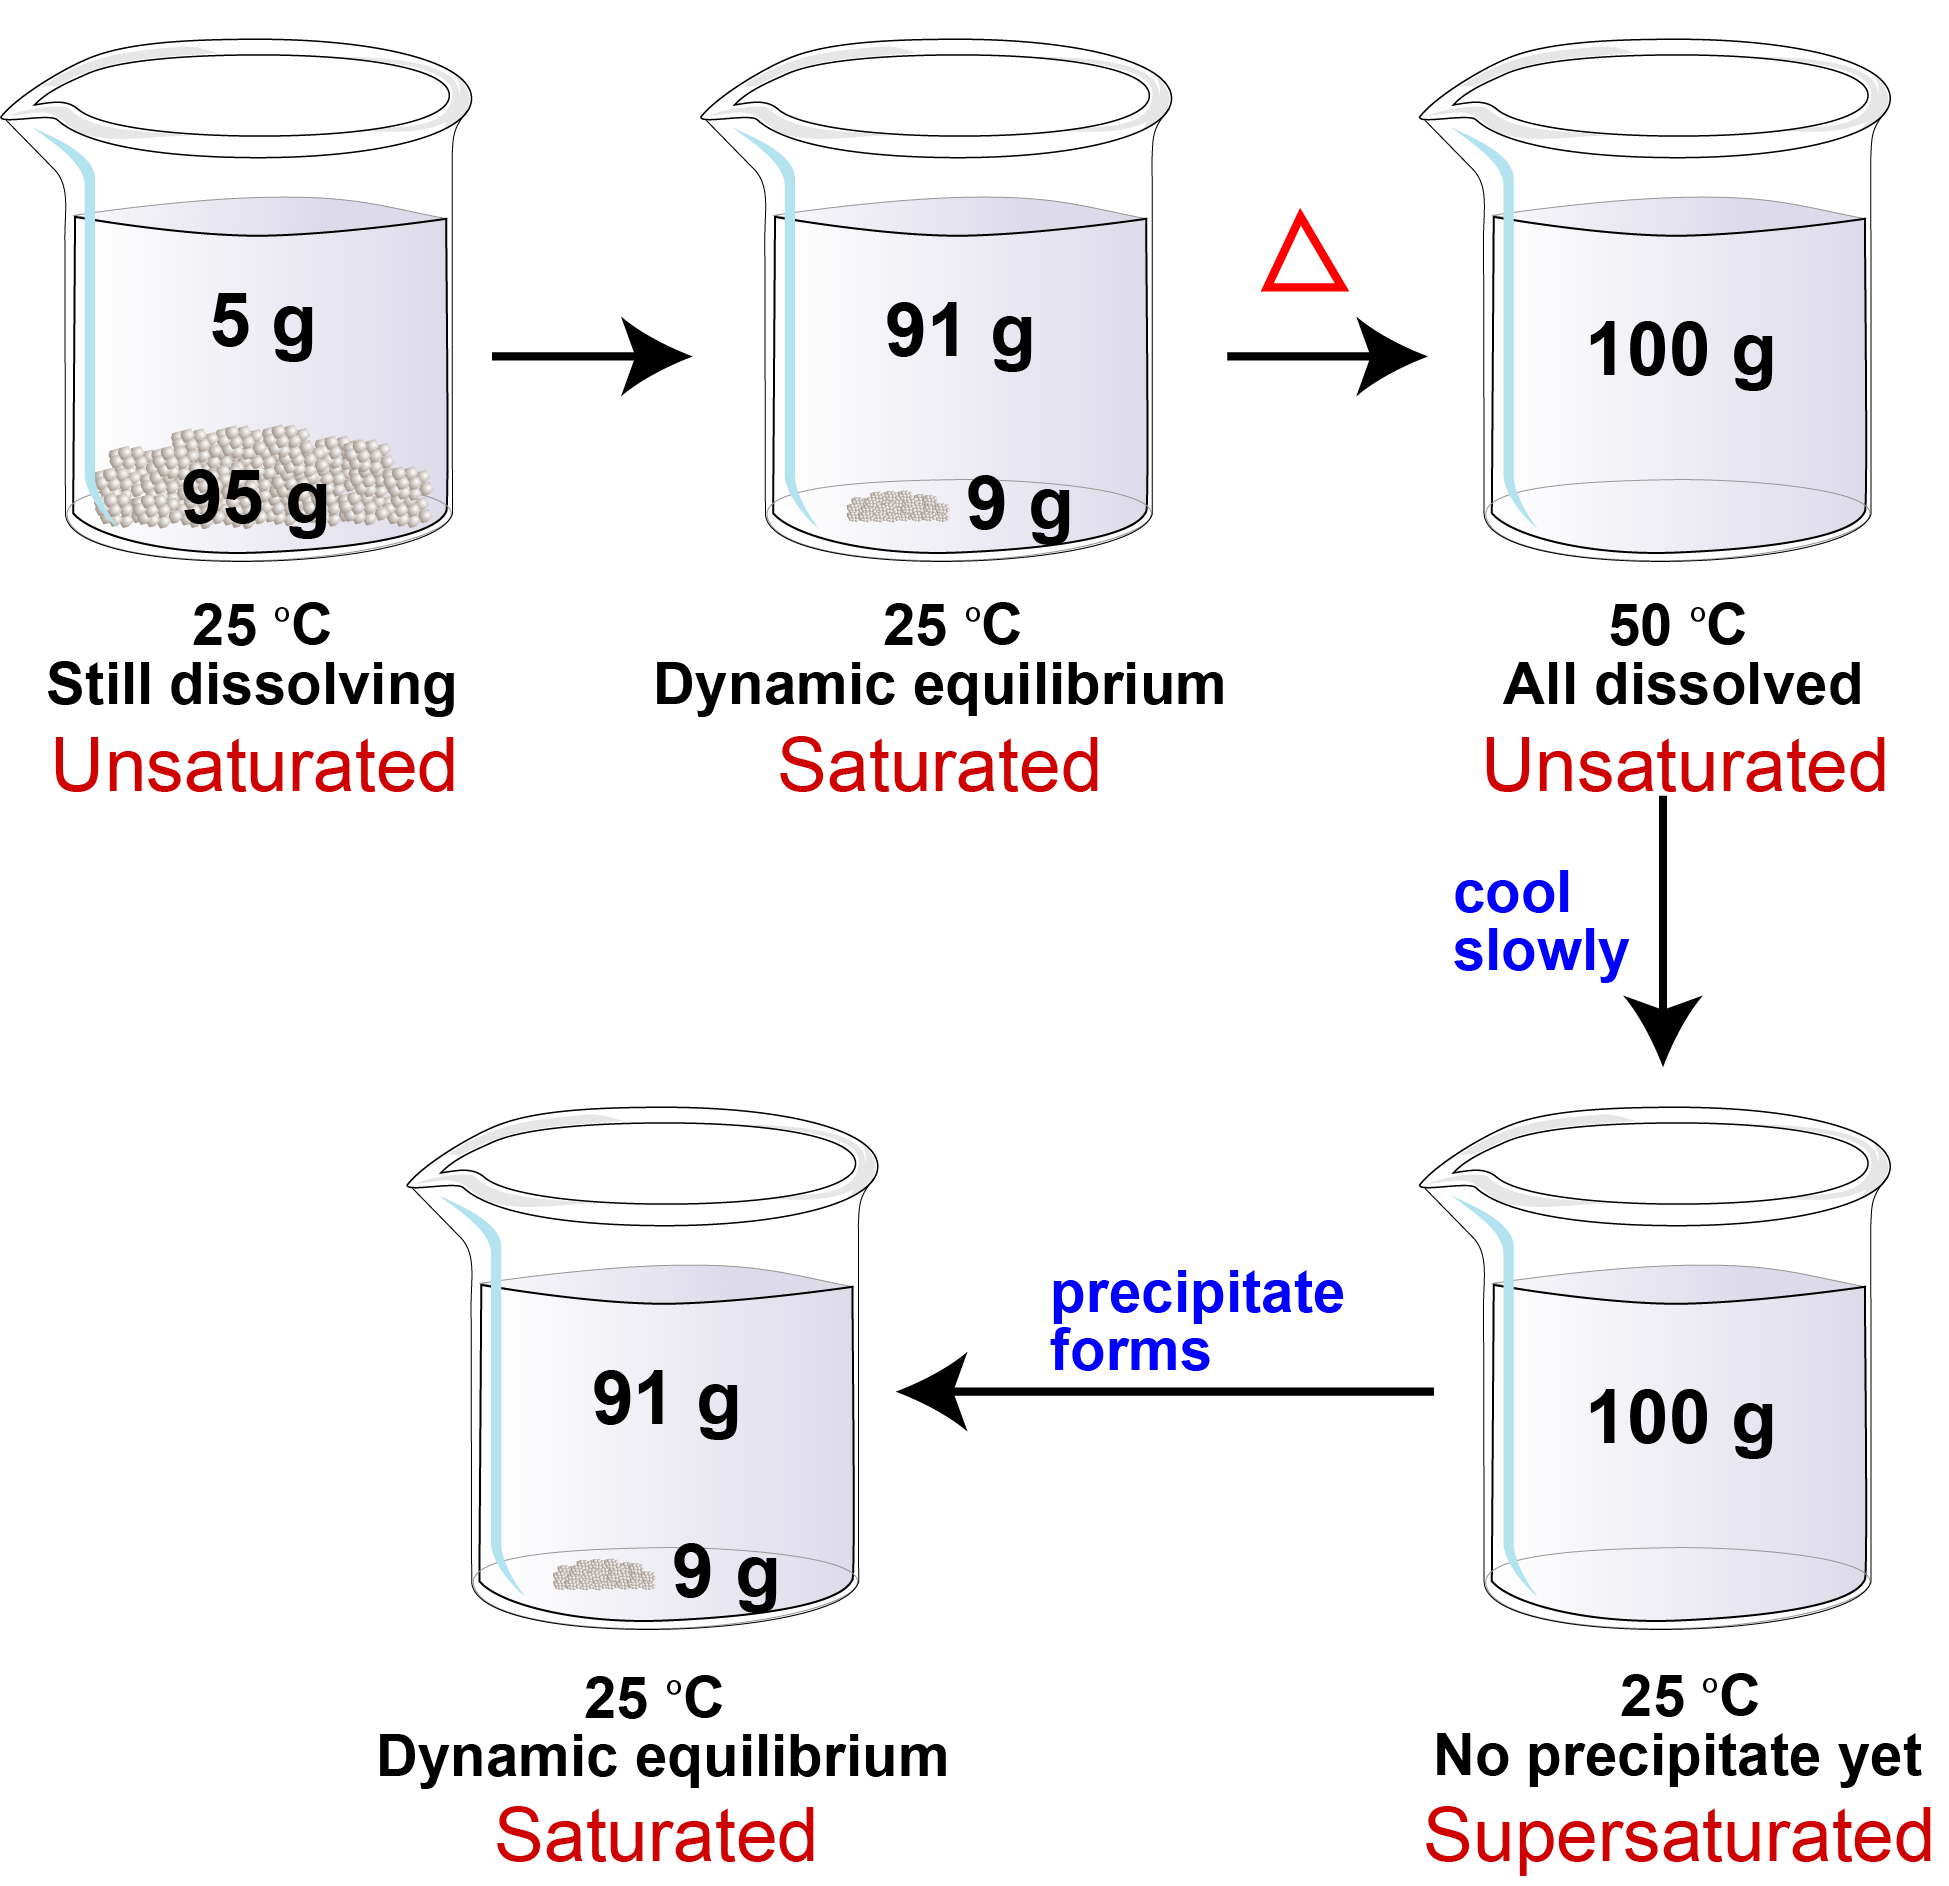 Image illustrating the process for making a supersaturated solution